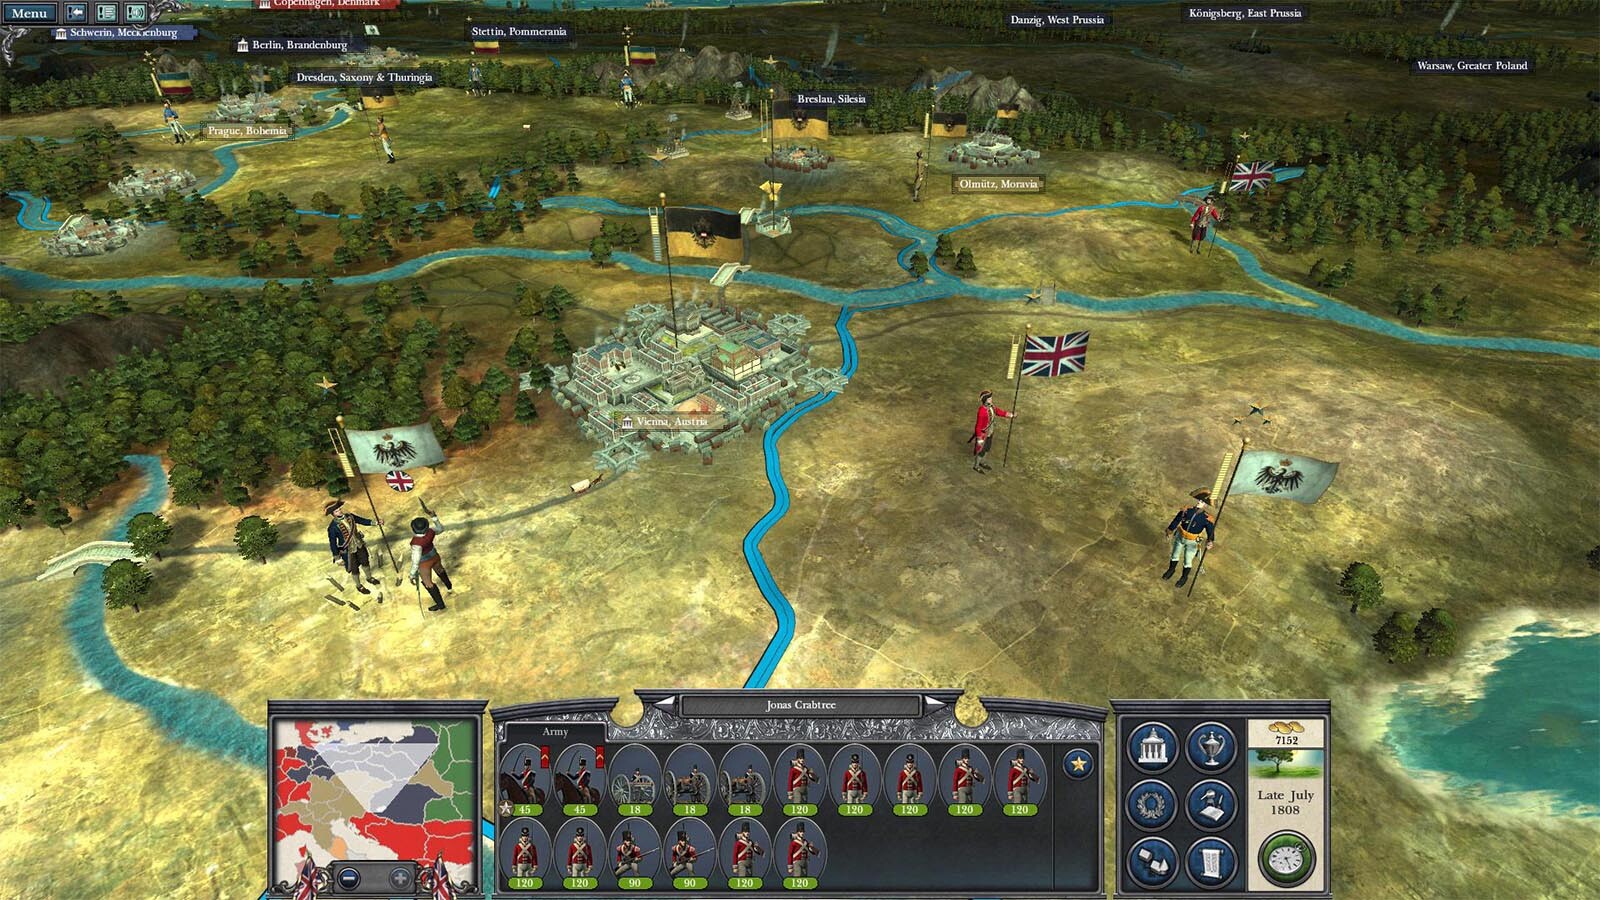 Napoleon Total War Complete Edition (PC Games) includes Total War: The  Peninsular Campaign and All Unit & Battle Packs